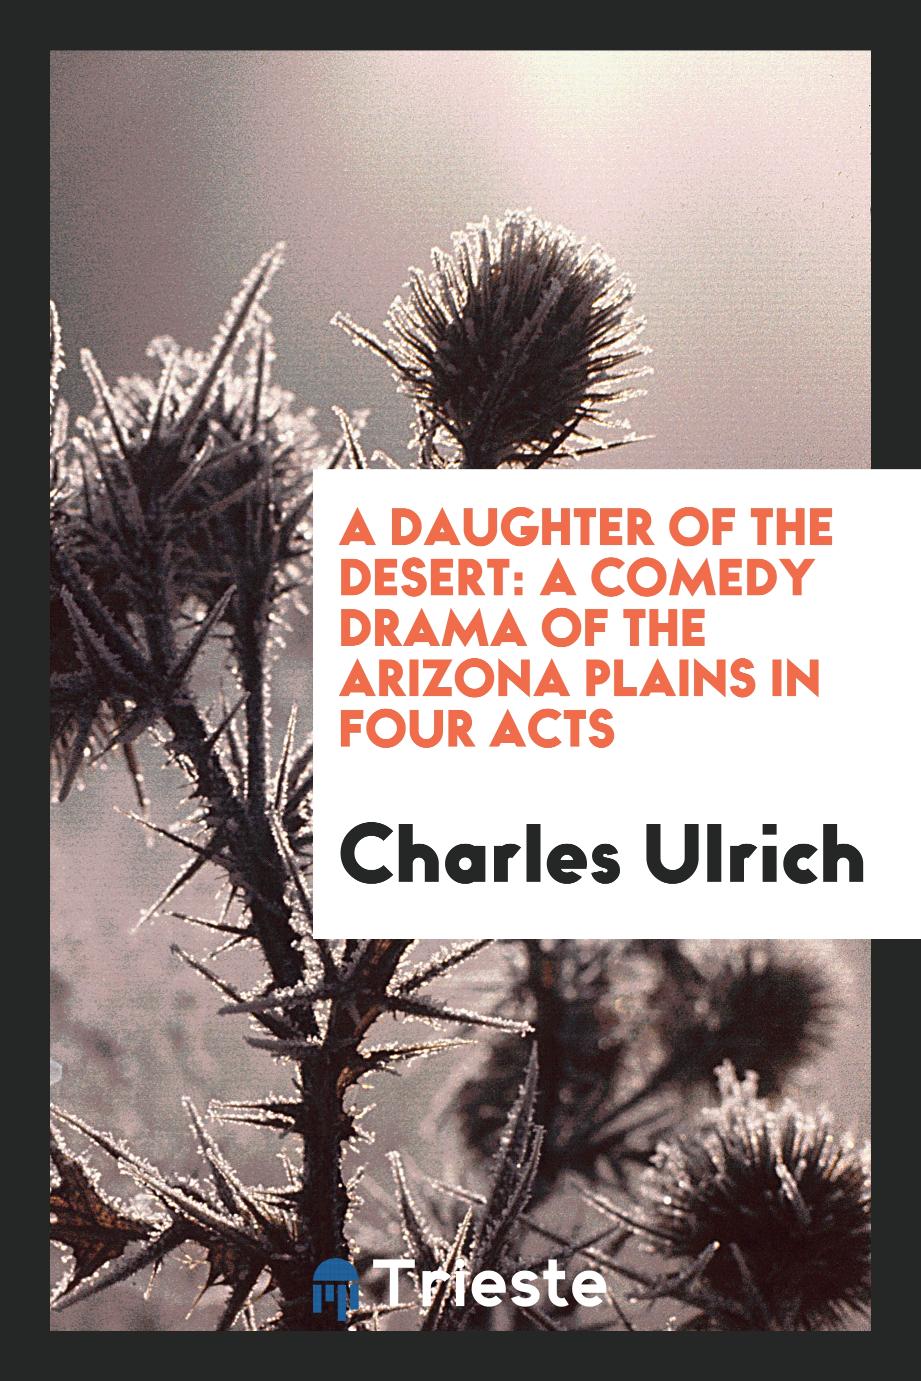 A Daughter of the Desert: A Comedy Drama of the Arizona Plains in Four Acts